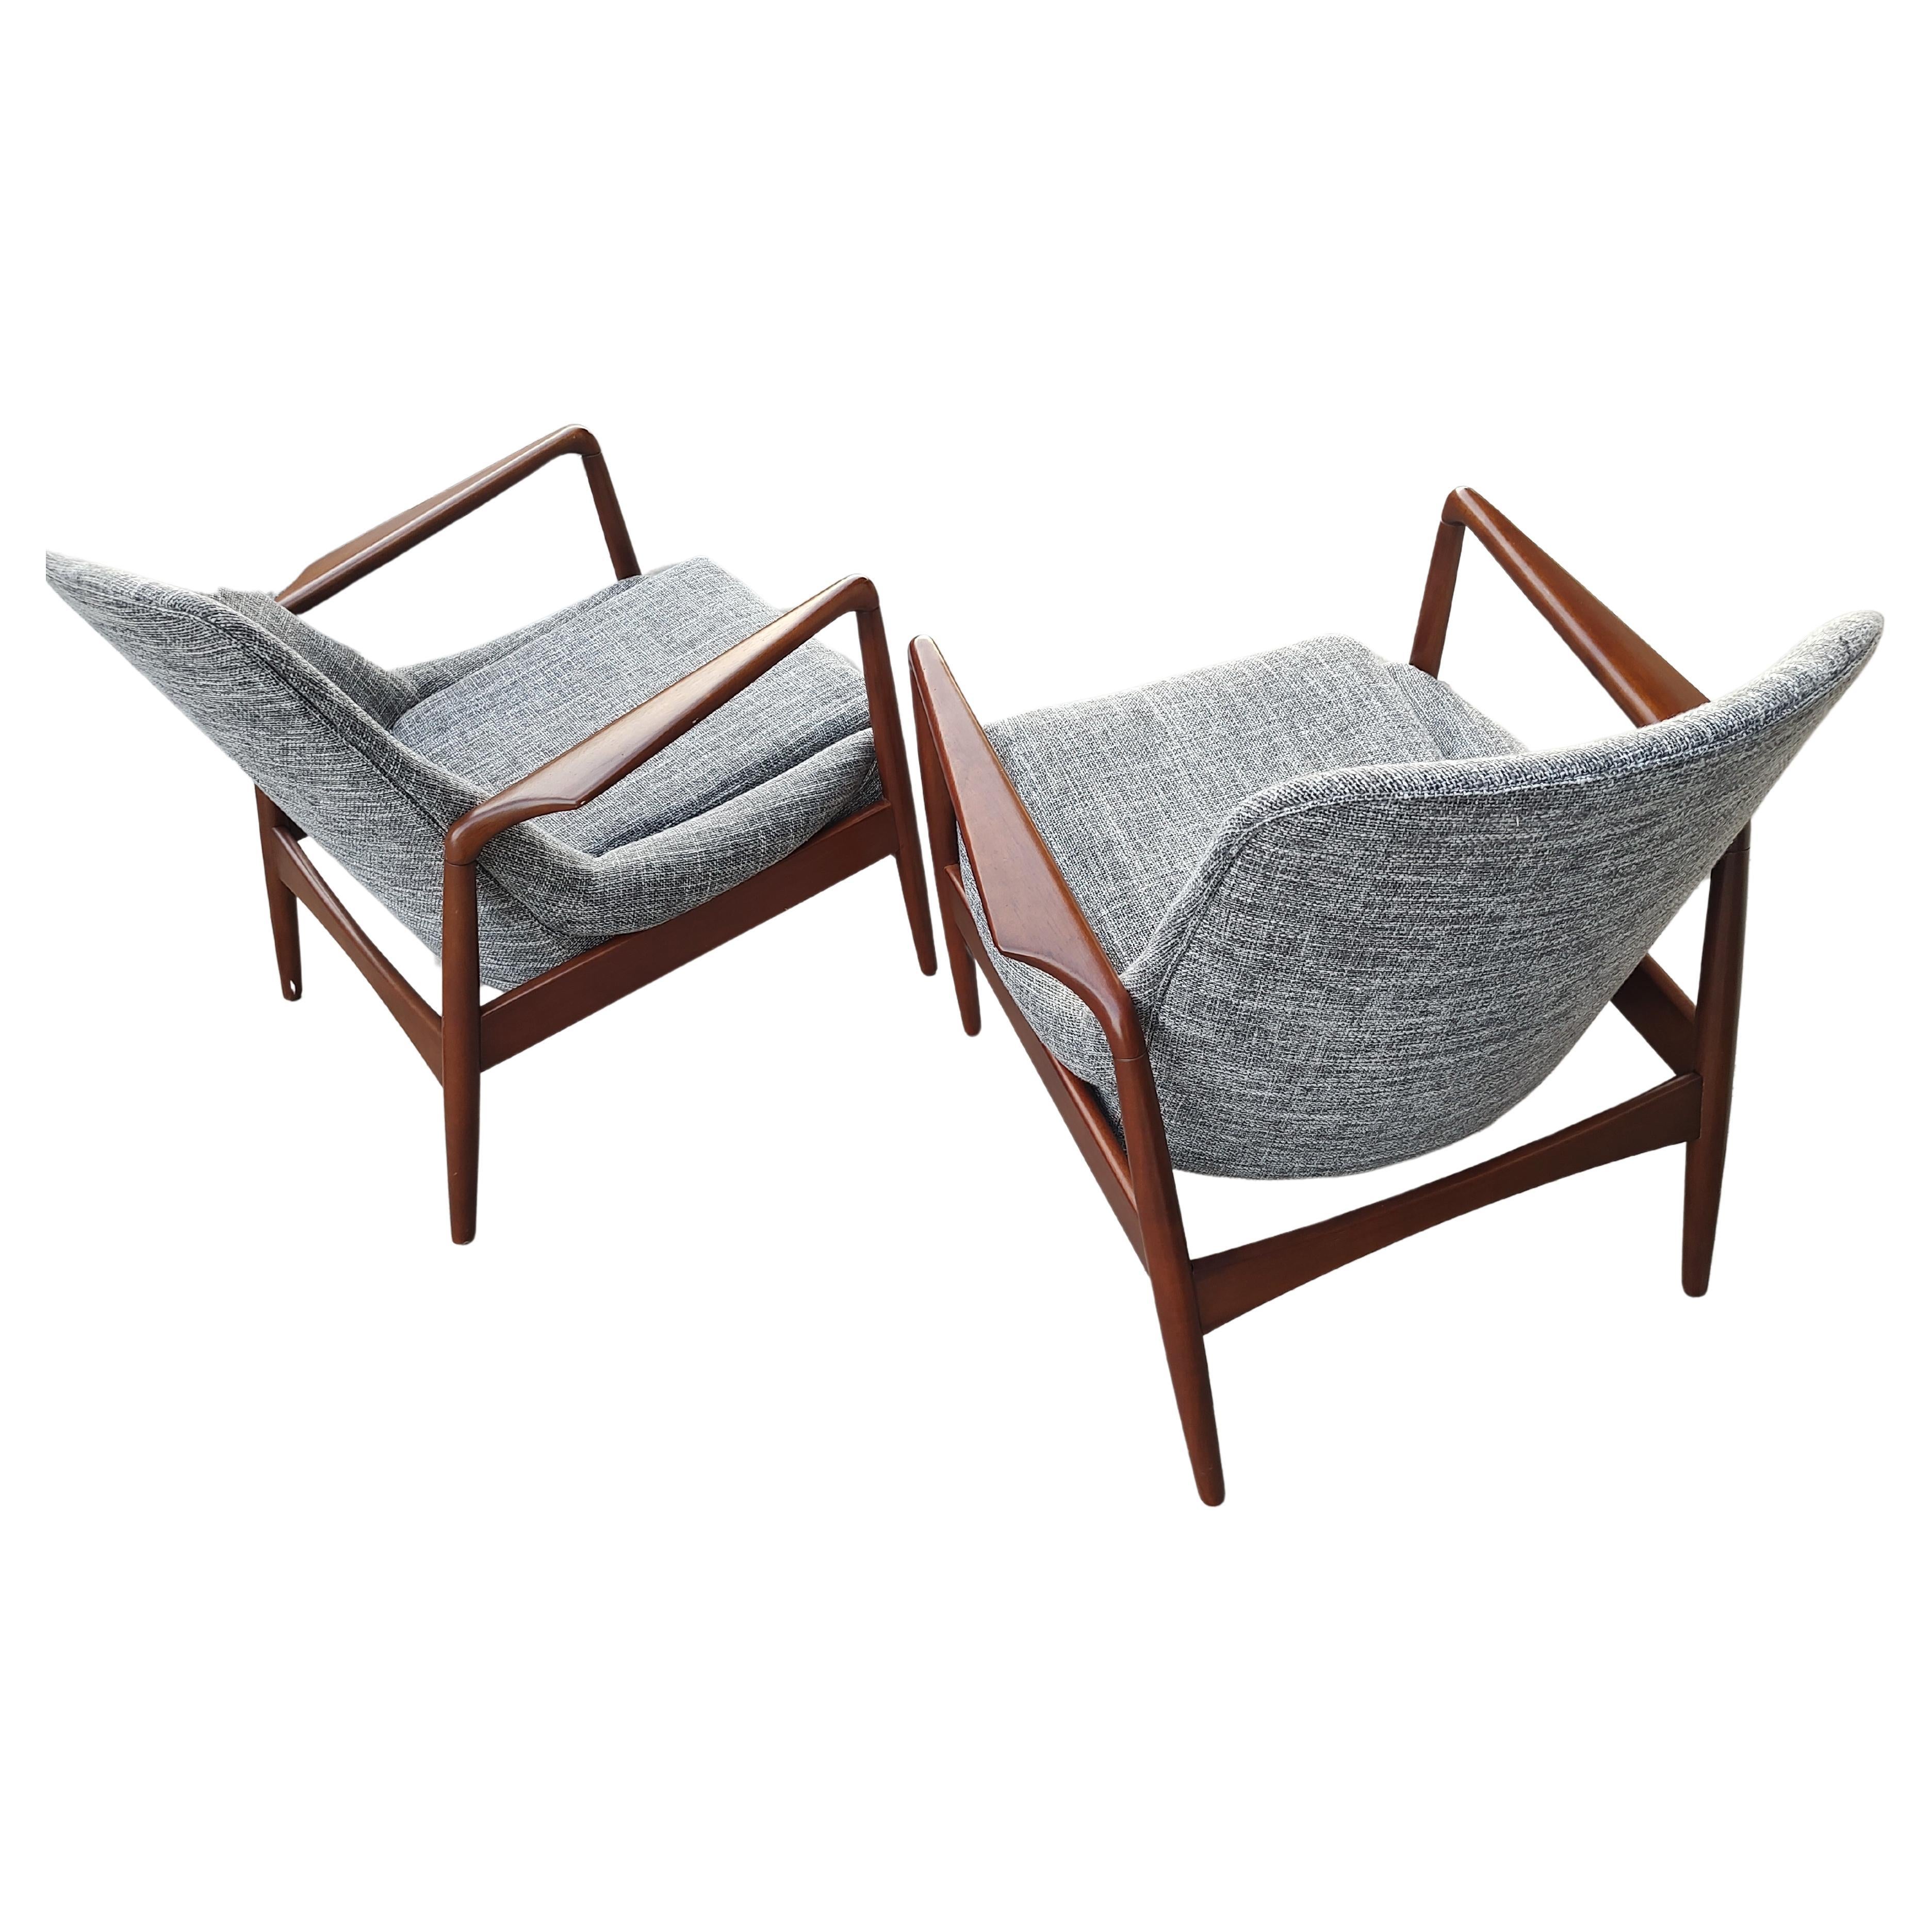 Pair of Mid Century Danish Modern Lounge Chairs style of Ib Kofod Larsen  In Good Condition For Sale In Port Jervis, NY